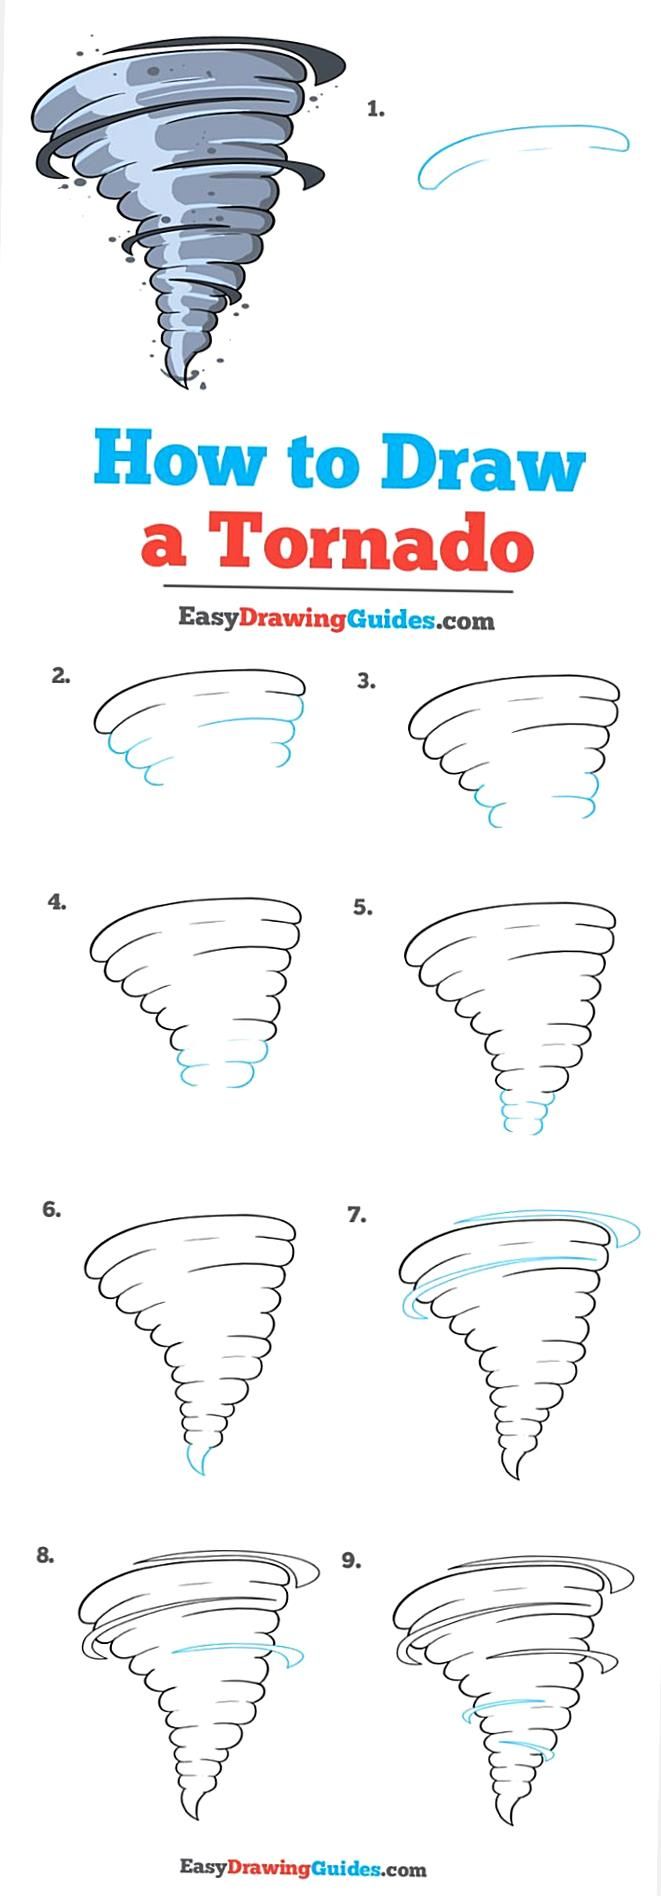 Learn To Draw A Tornado This Step-By-Step Tutorial Makes It Easy Kids And Beginners Alike Can Now Draw A Great Looking Tornado